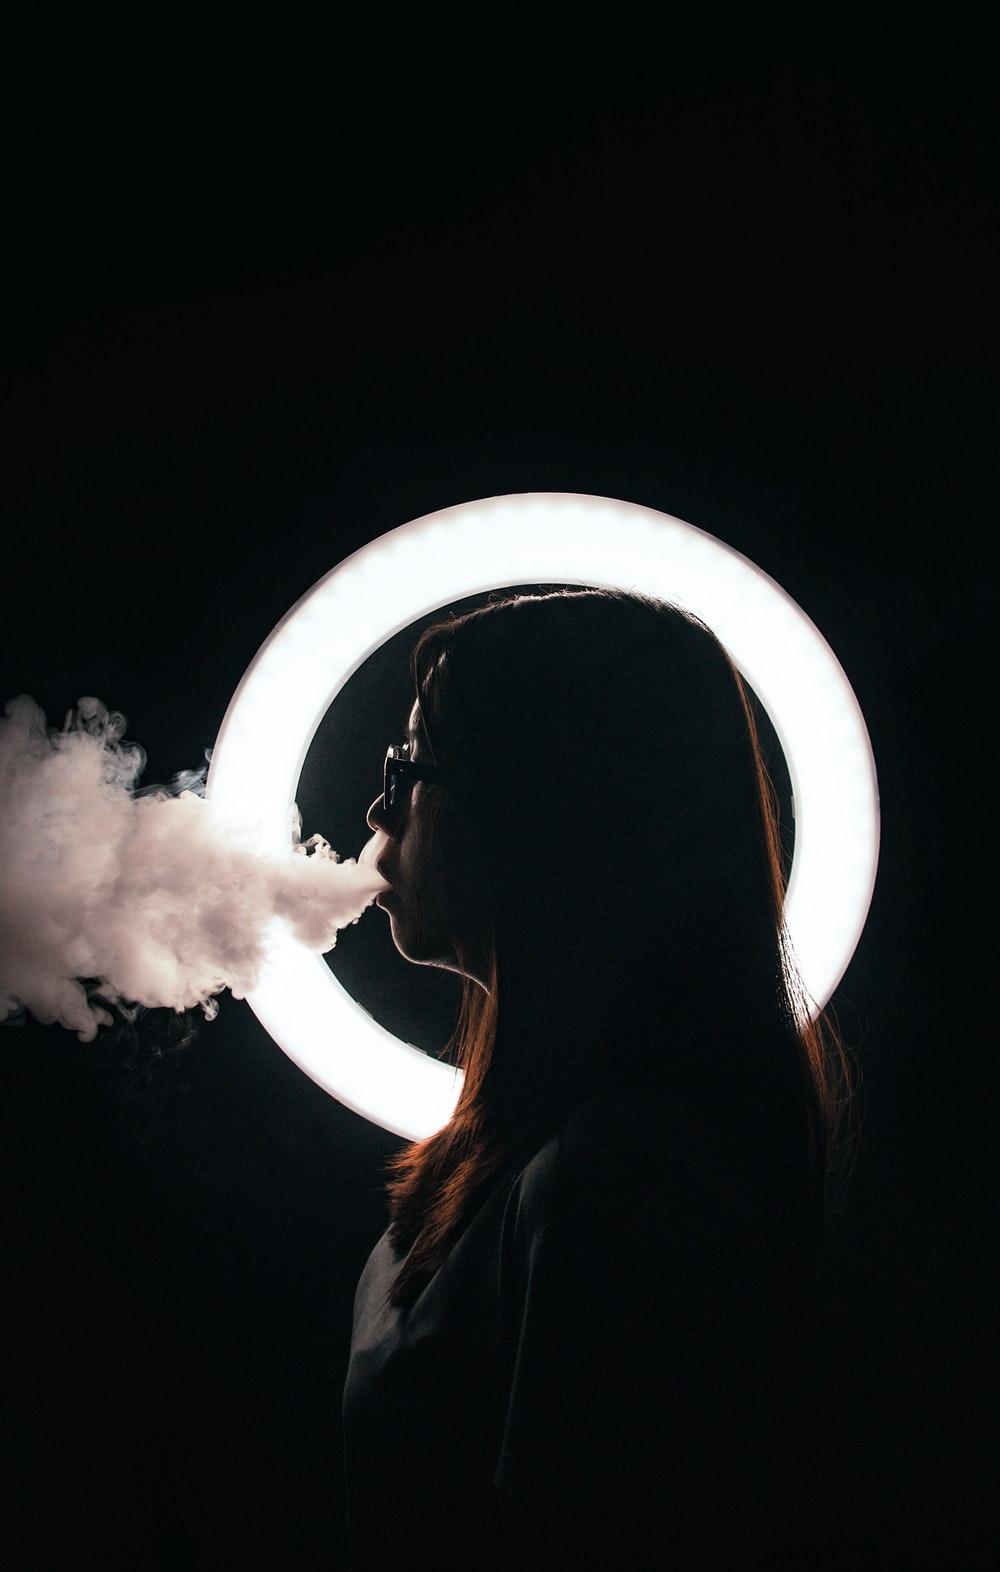 Vape Picture [HD]. Download Free Image